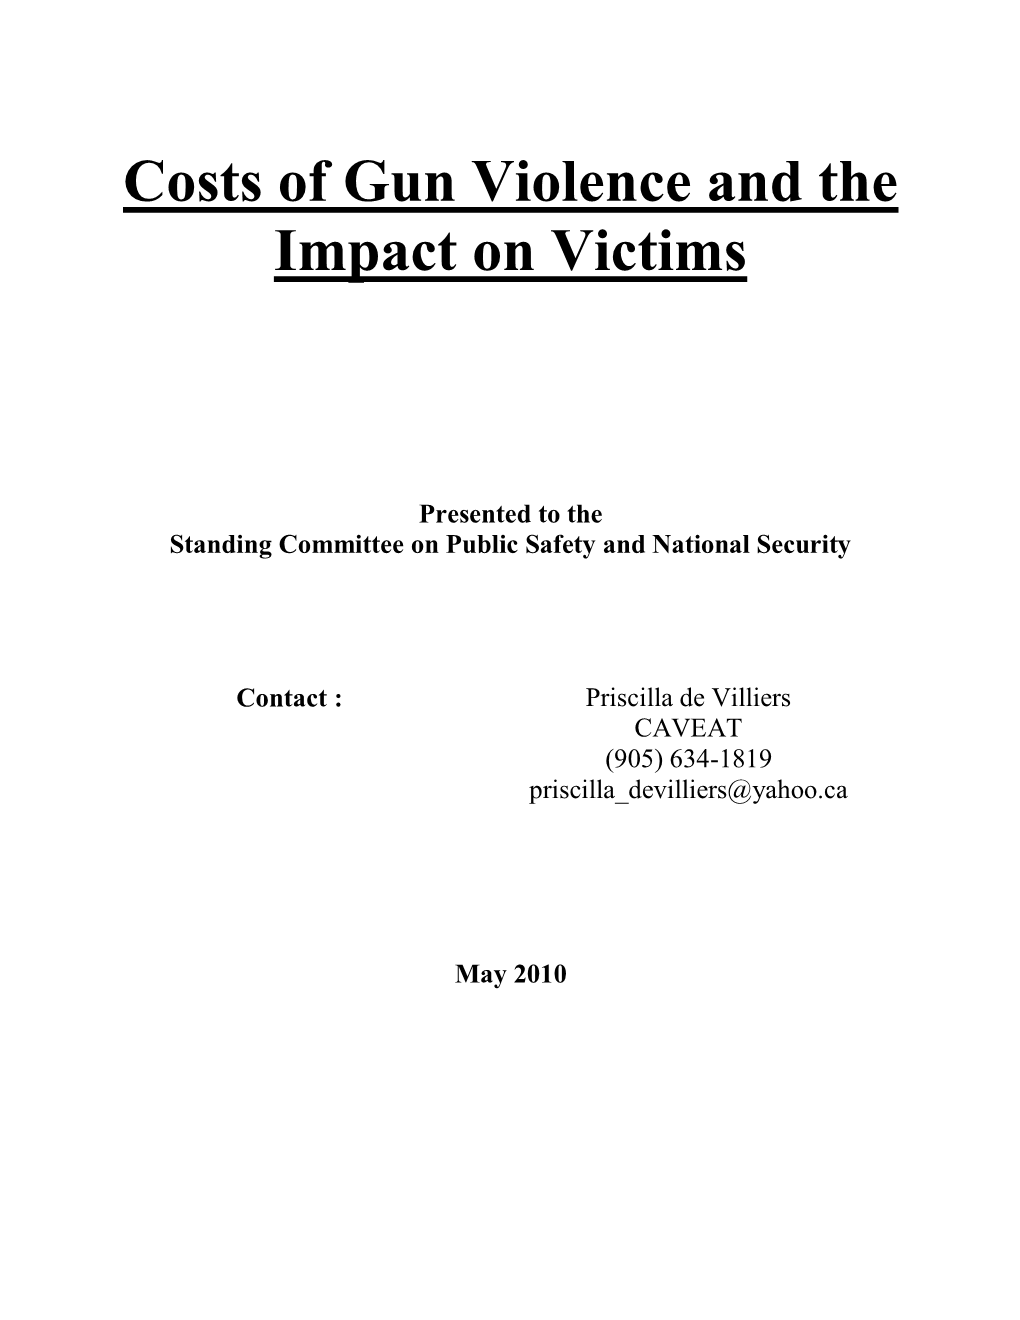 Costs of Gun Violence and the Impact on Victims 2